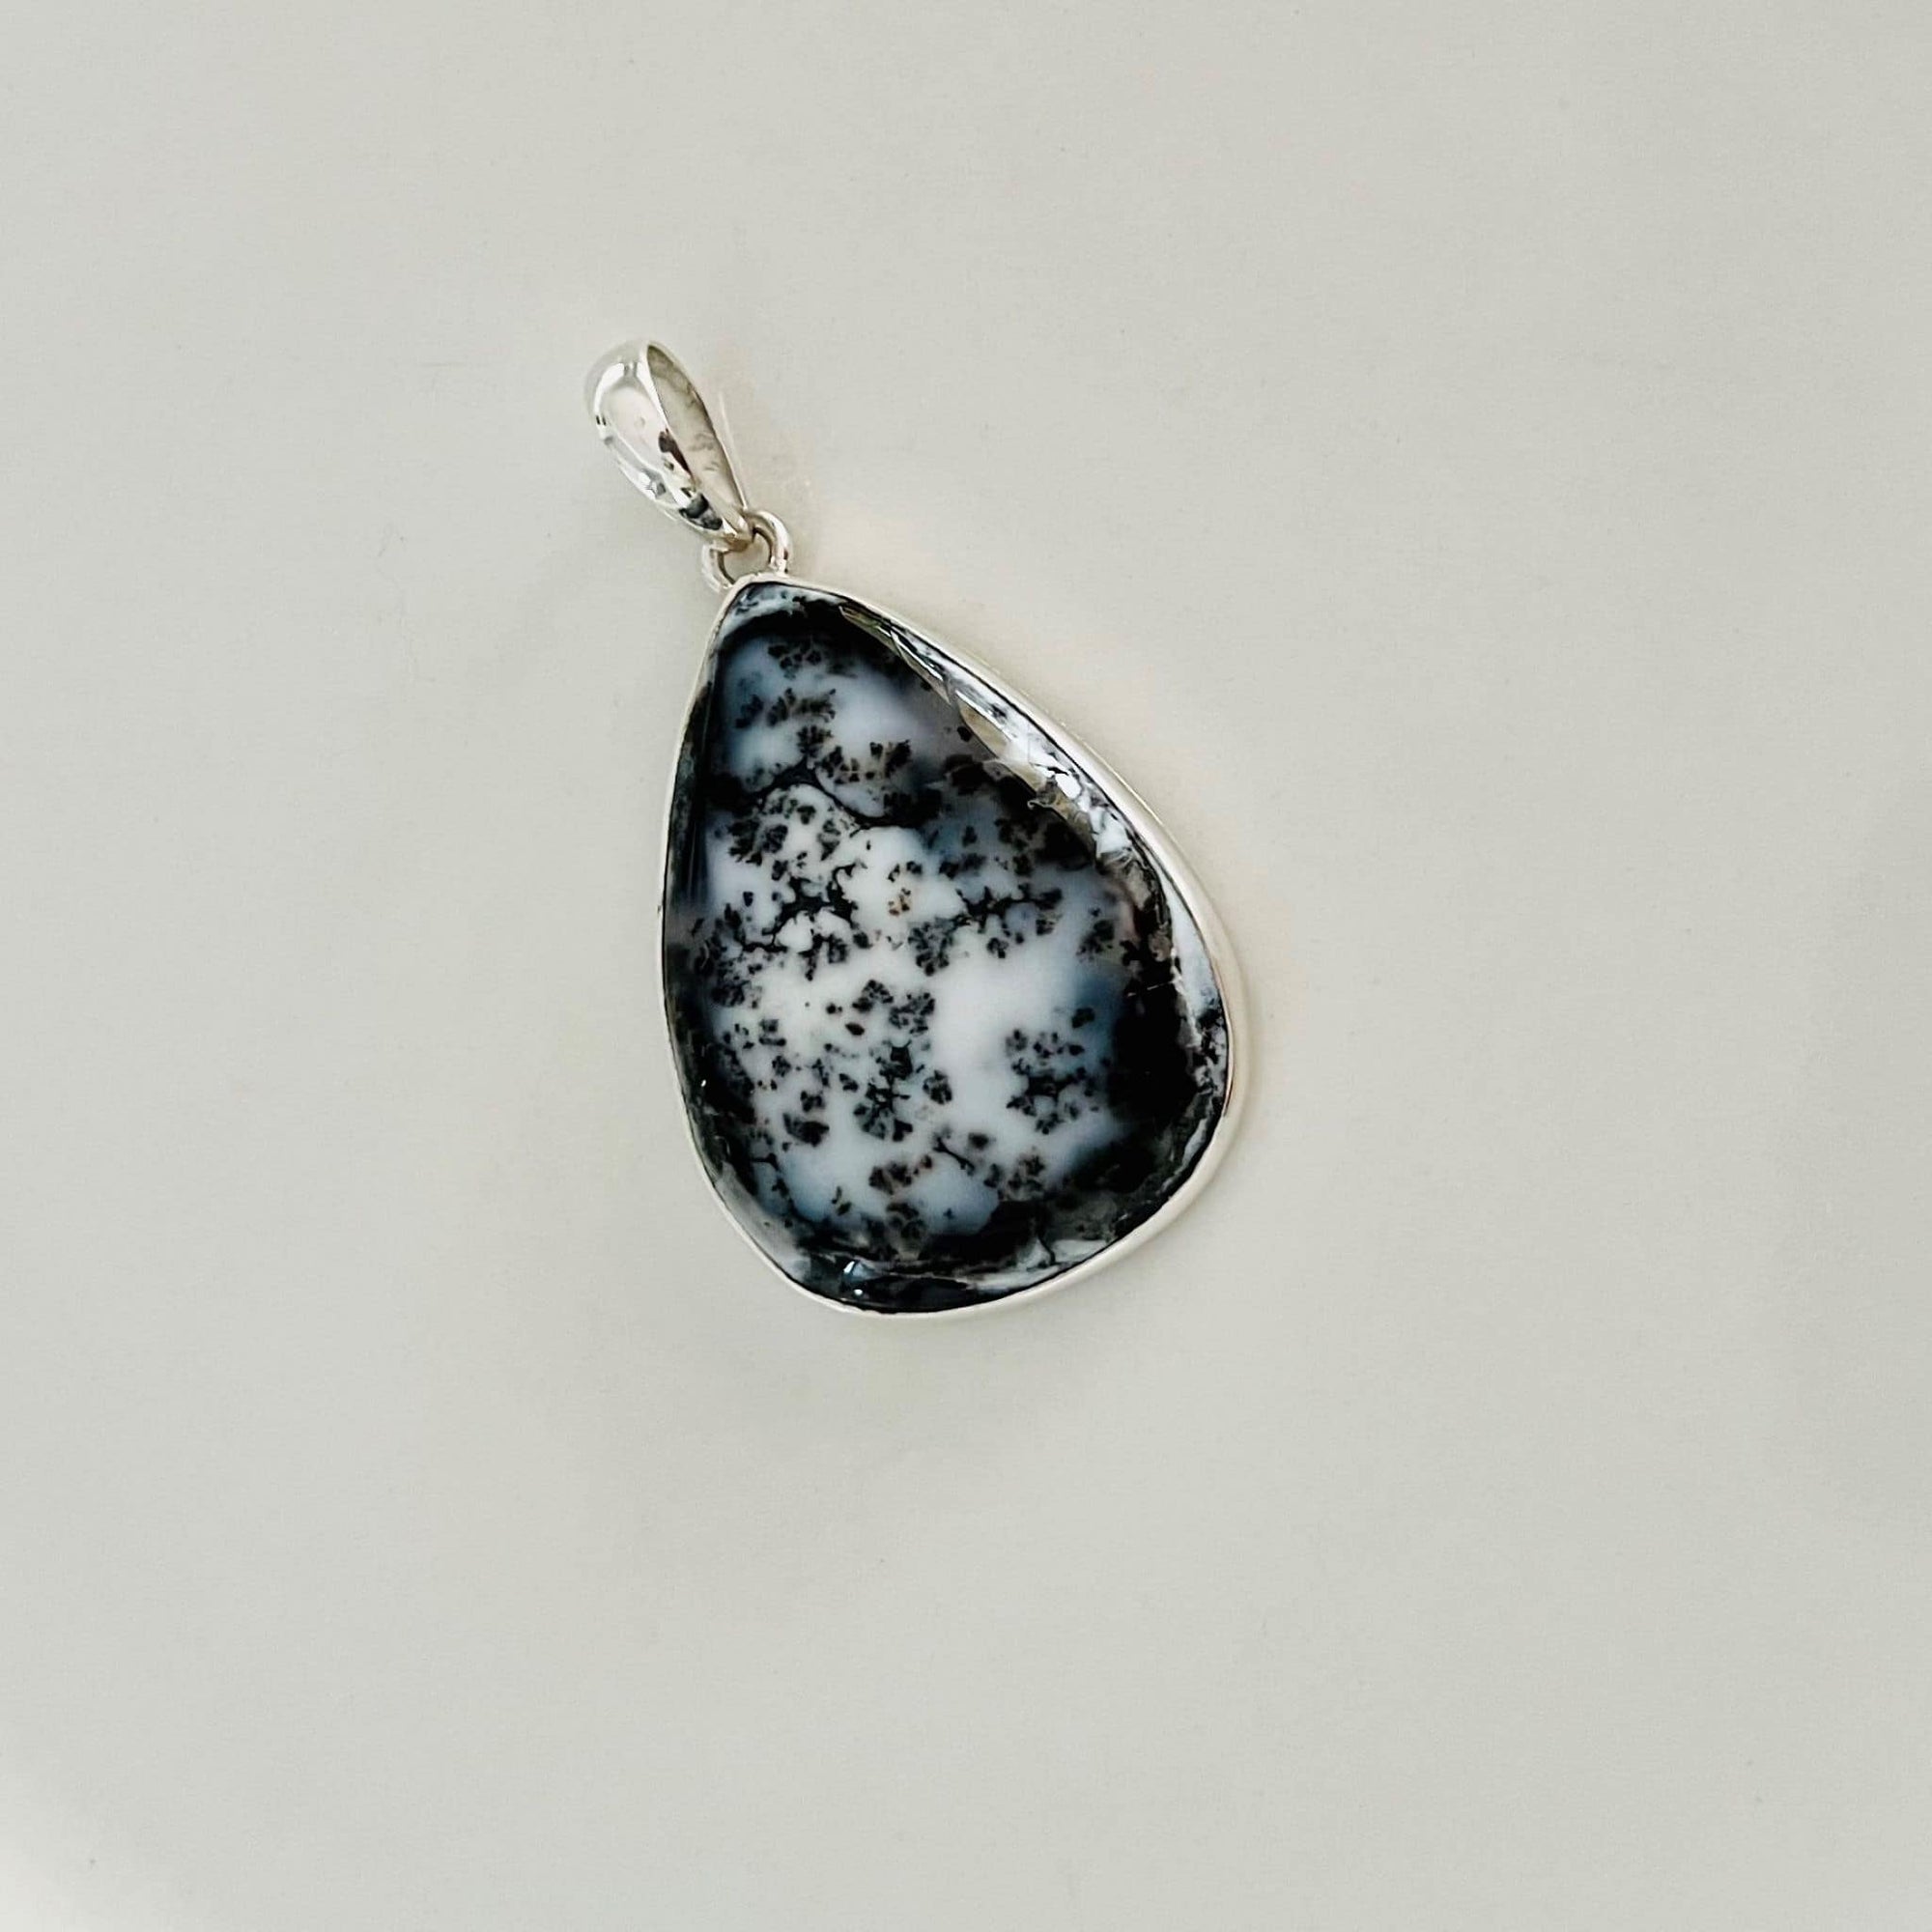 Beautifully Gifted TRIANGULAR DENDRITIC AGATE PENDANT